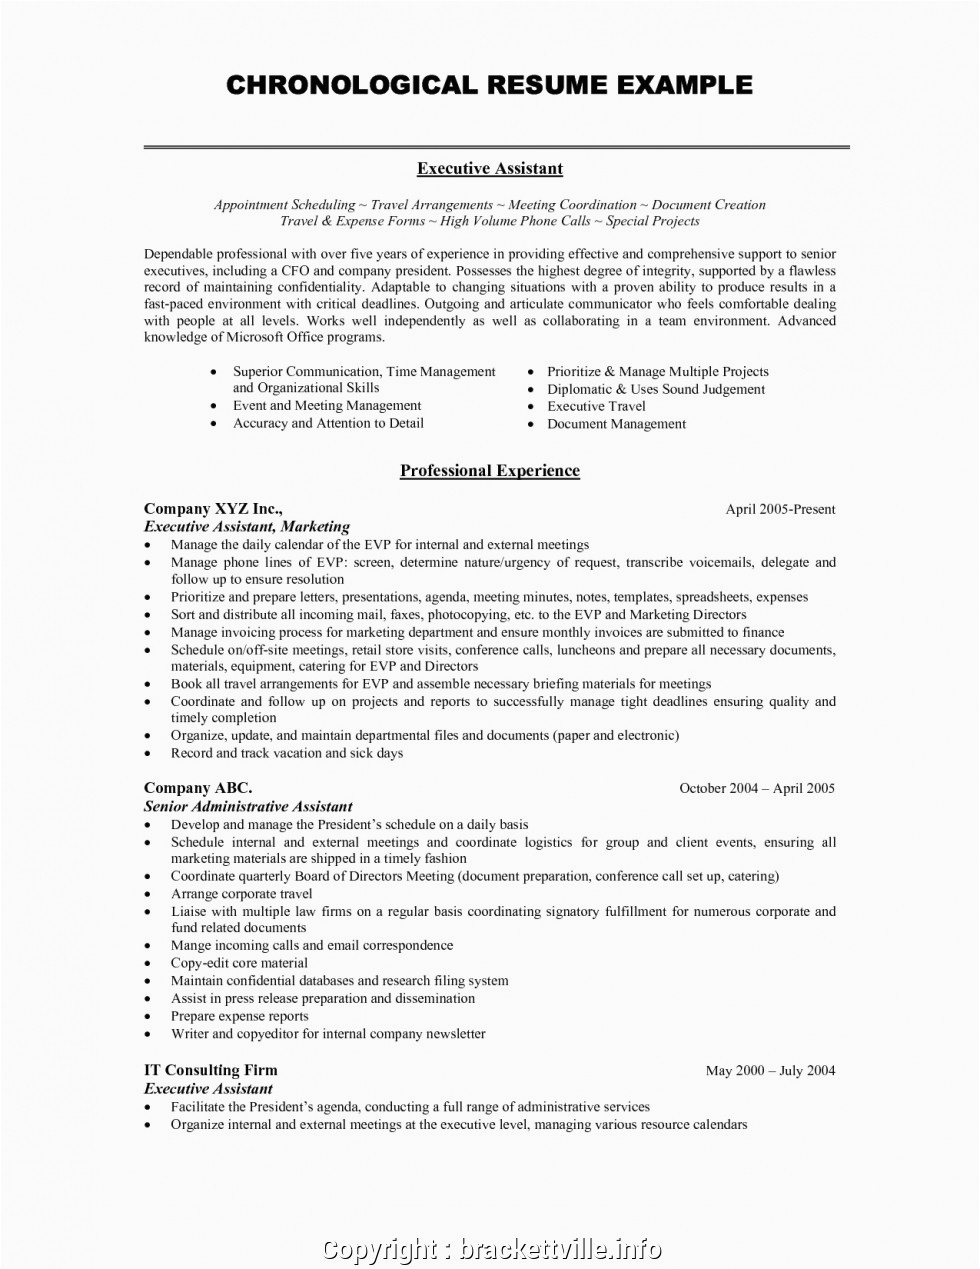 Sales and Marketing Resume Sample Download Simply Sales and Marketing Cv Template Awful Sales